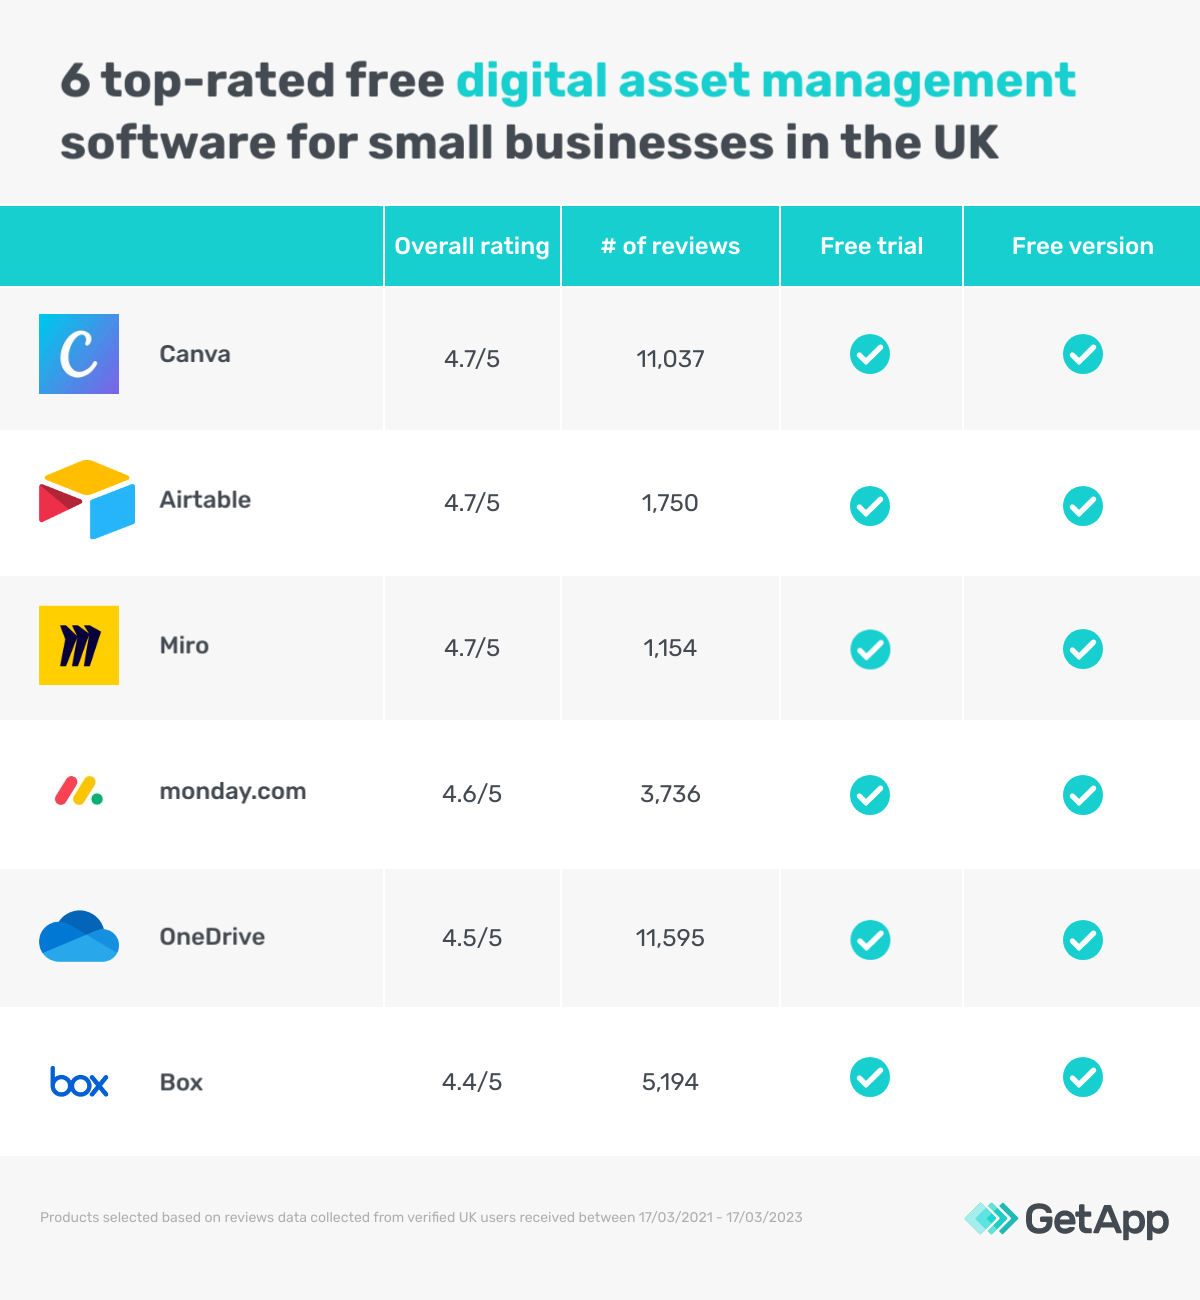 Graph showing top-rated free digital asset management tools